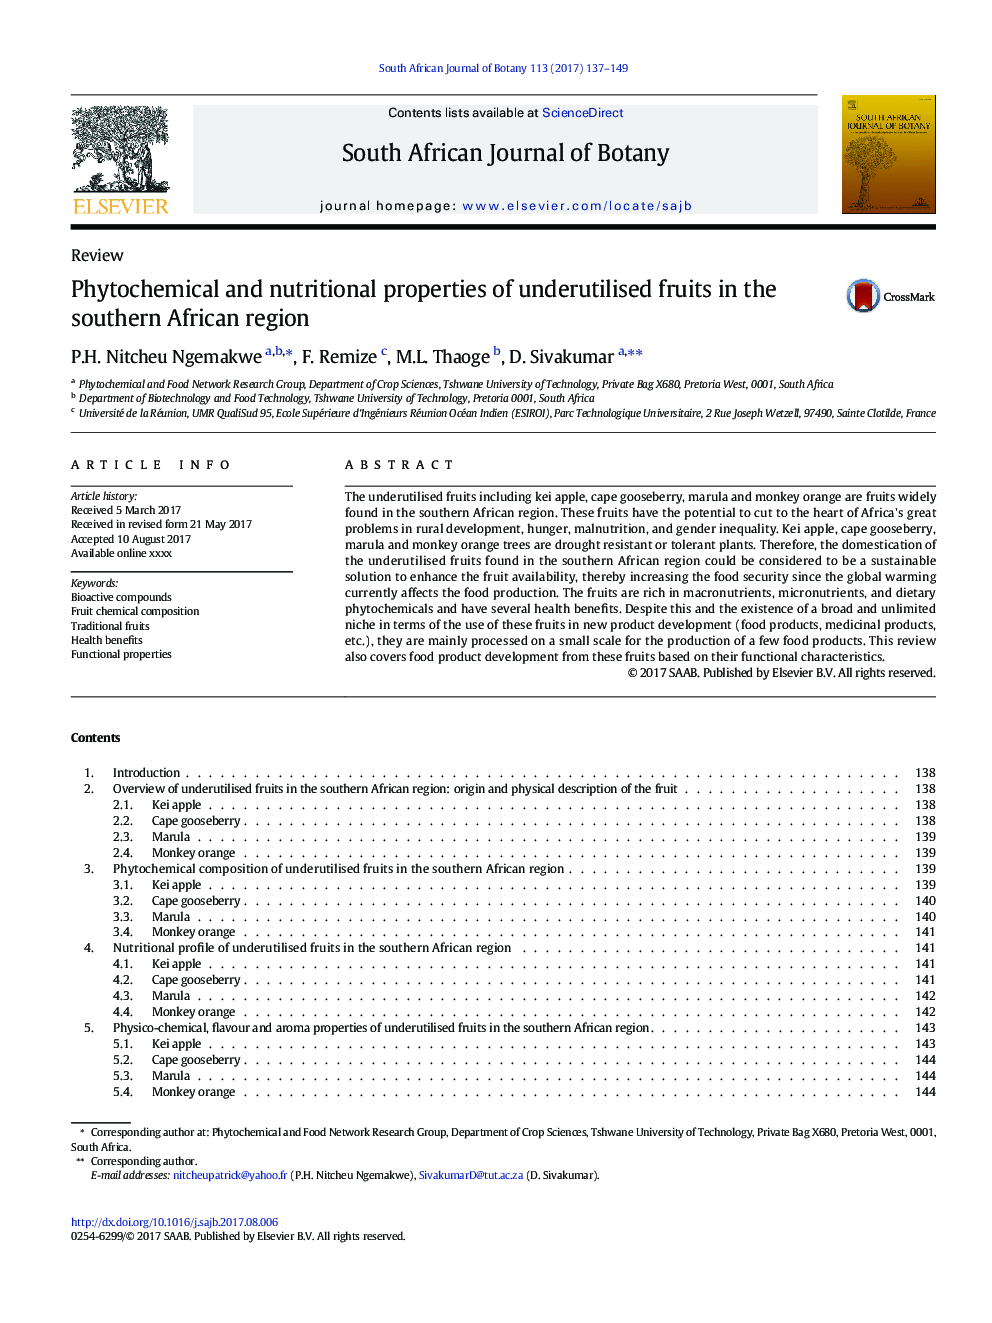 Phytochemical and nutritional properties of underutilised fruits in the southern African region